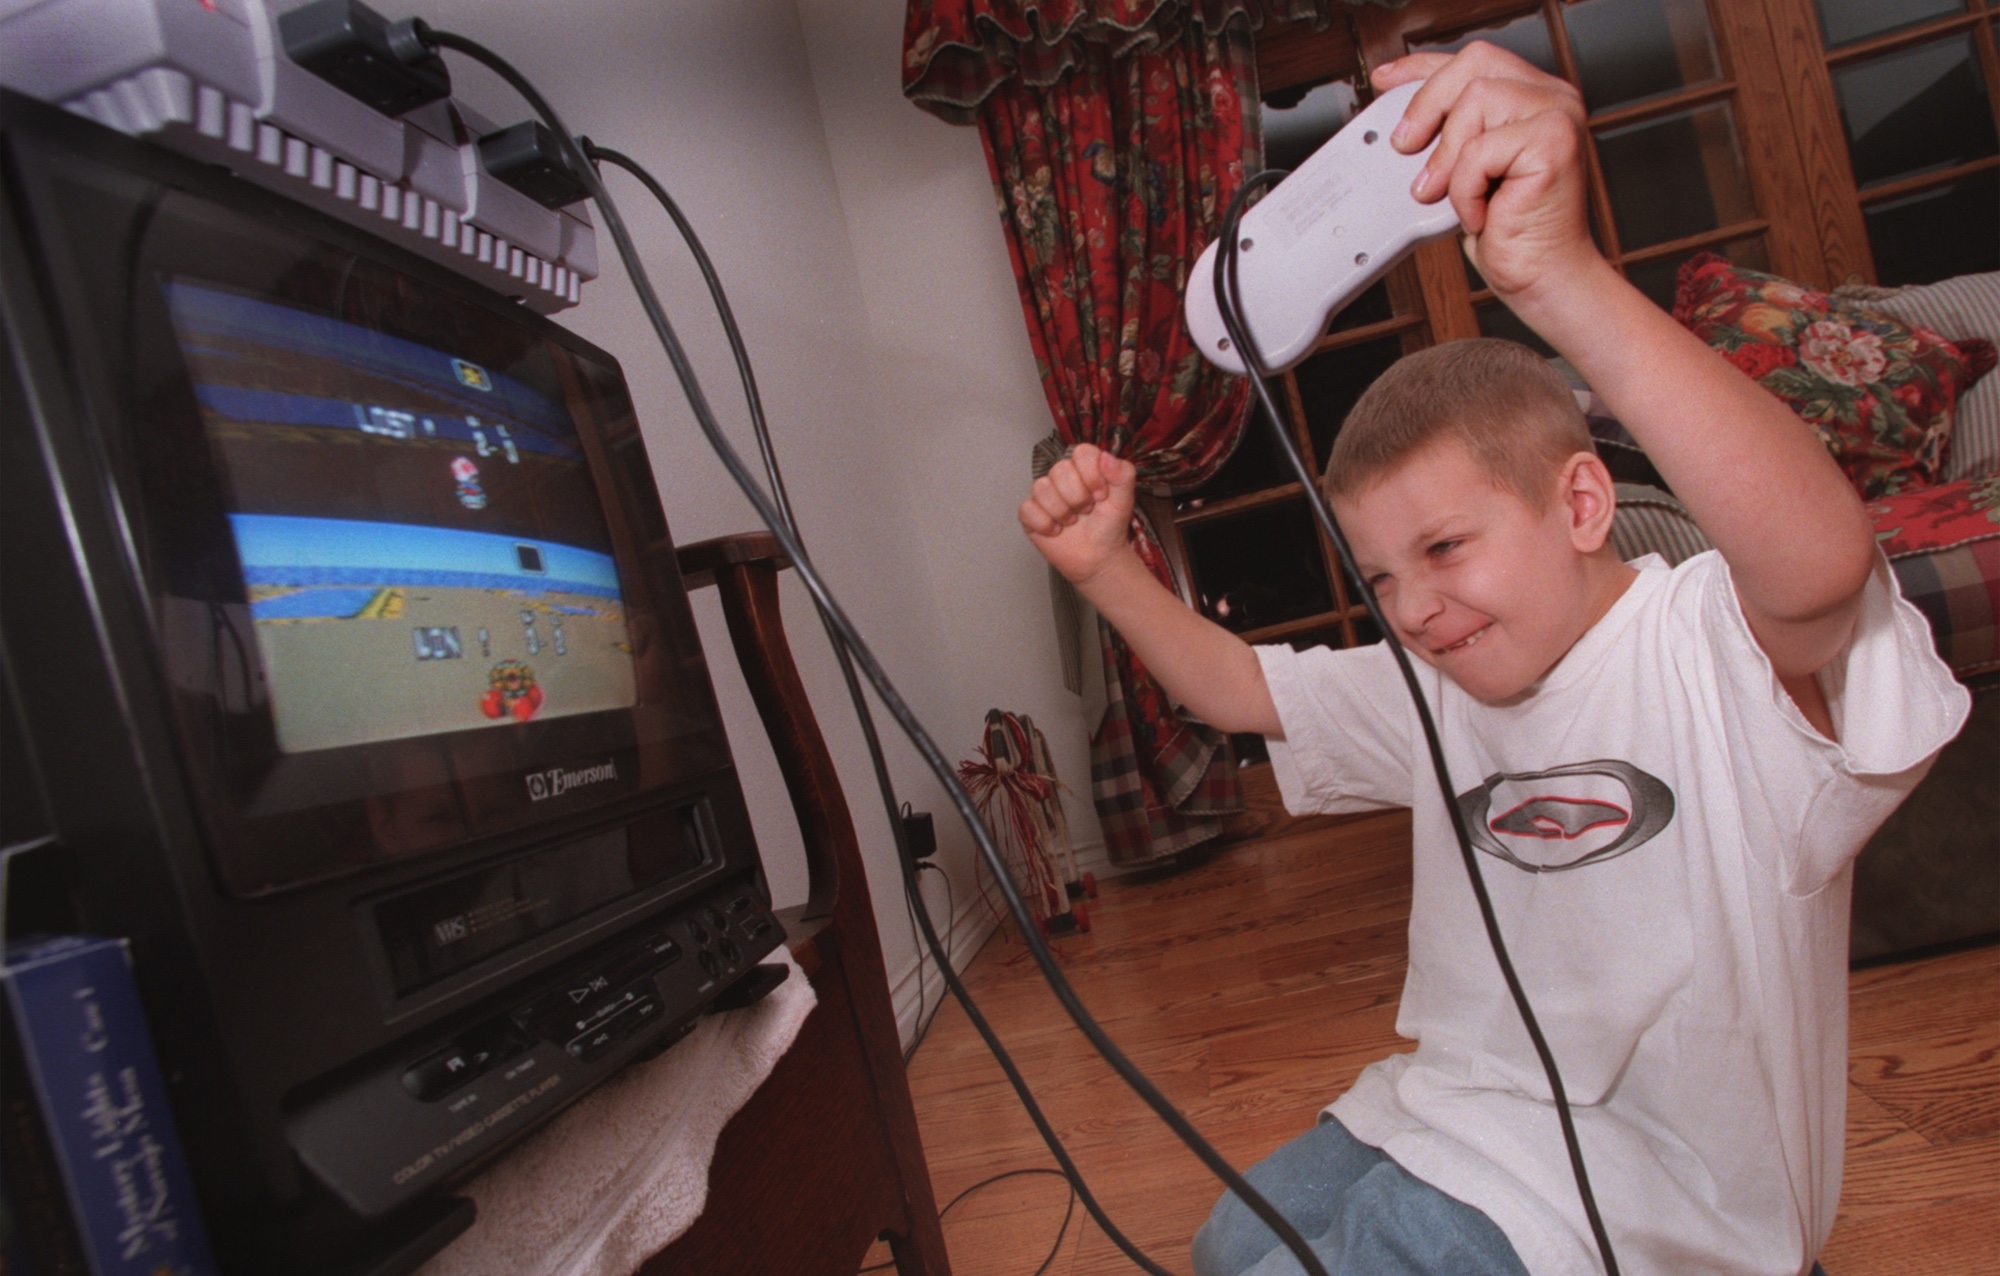 Billy Hale, age 7, Simi Valley celebrates a Nintendo victory over his brother. Photo/Art by:Alan Hagman